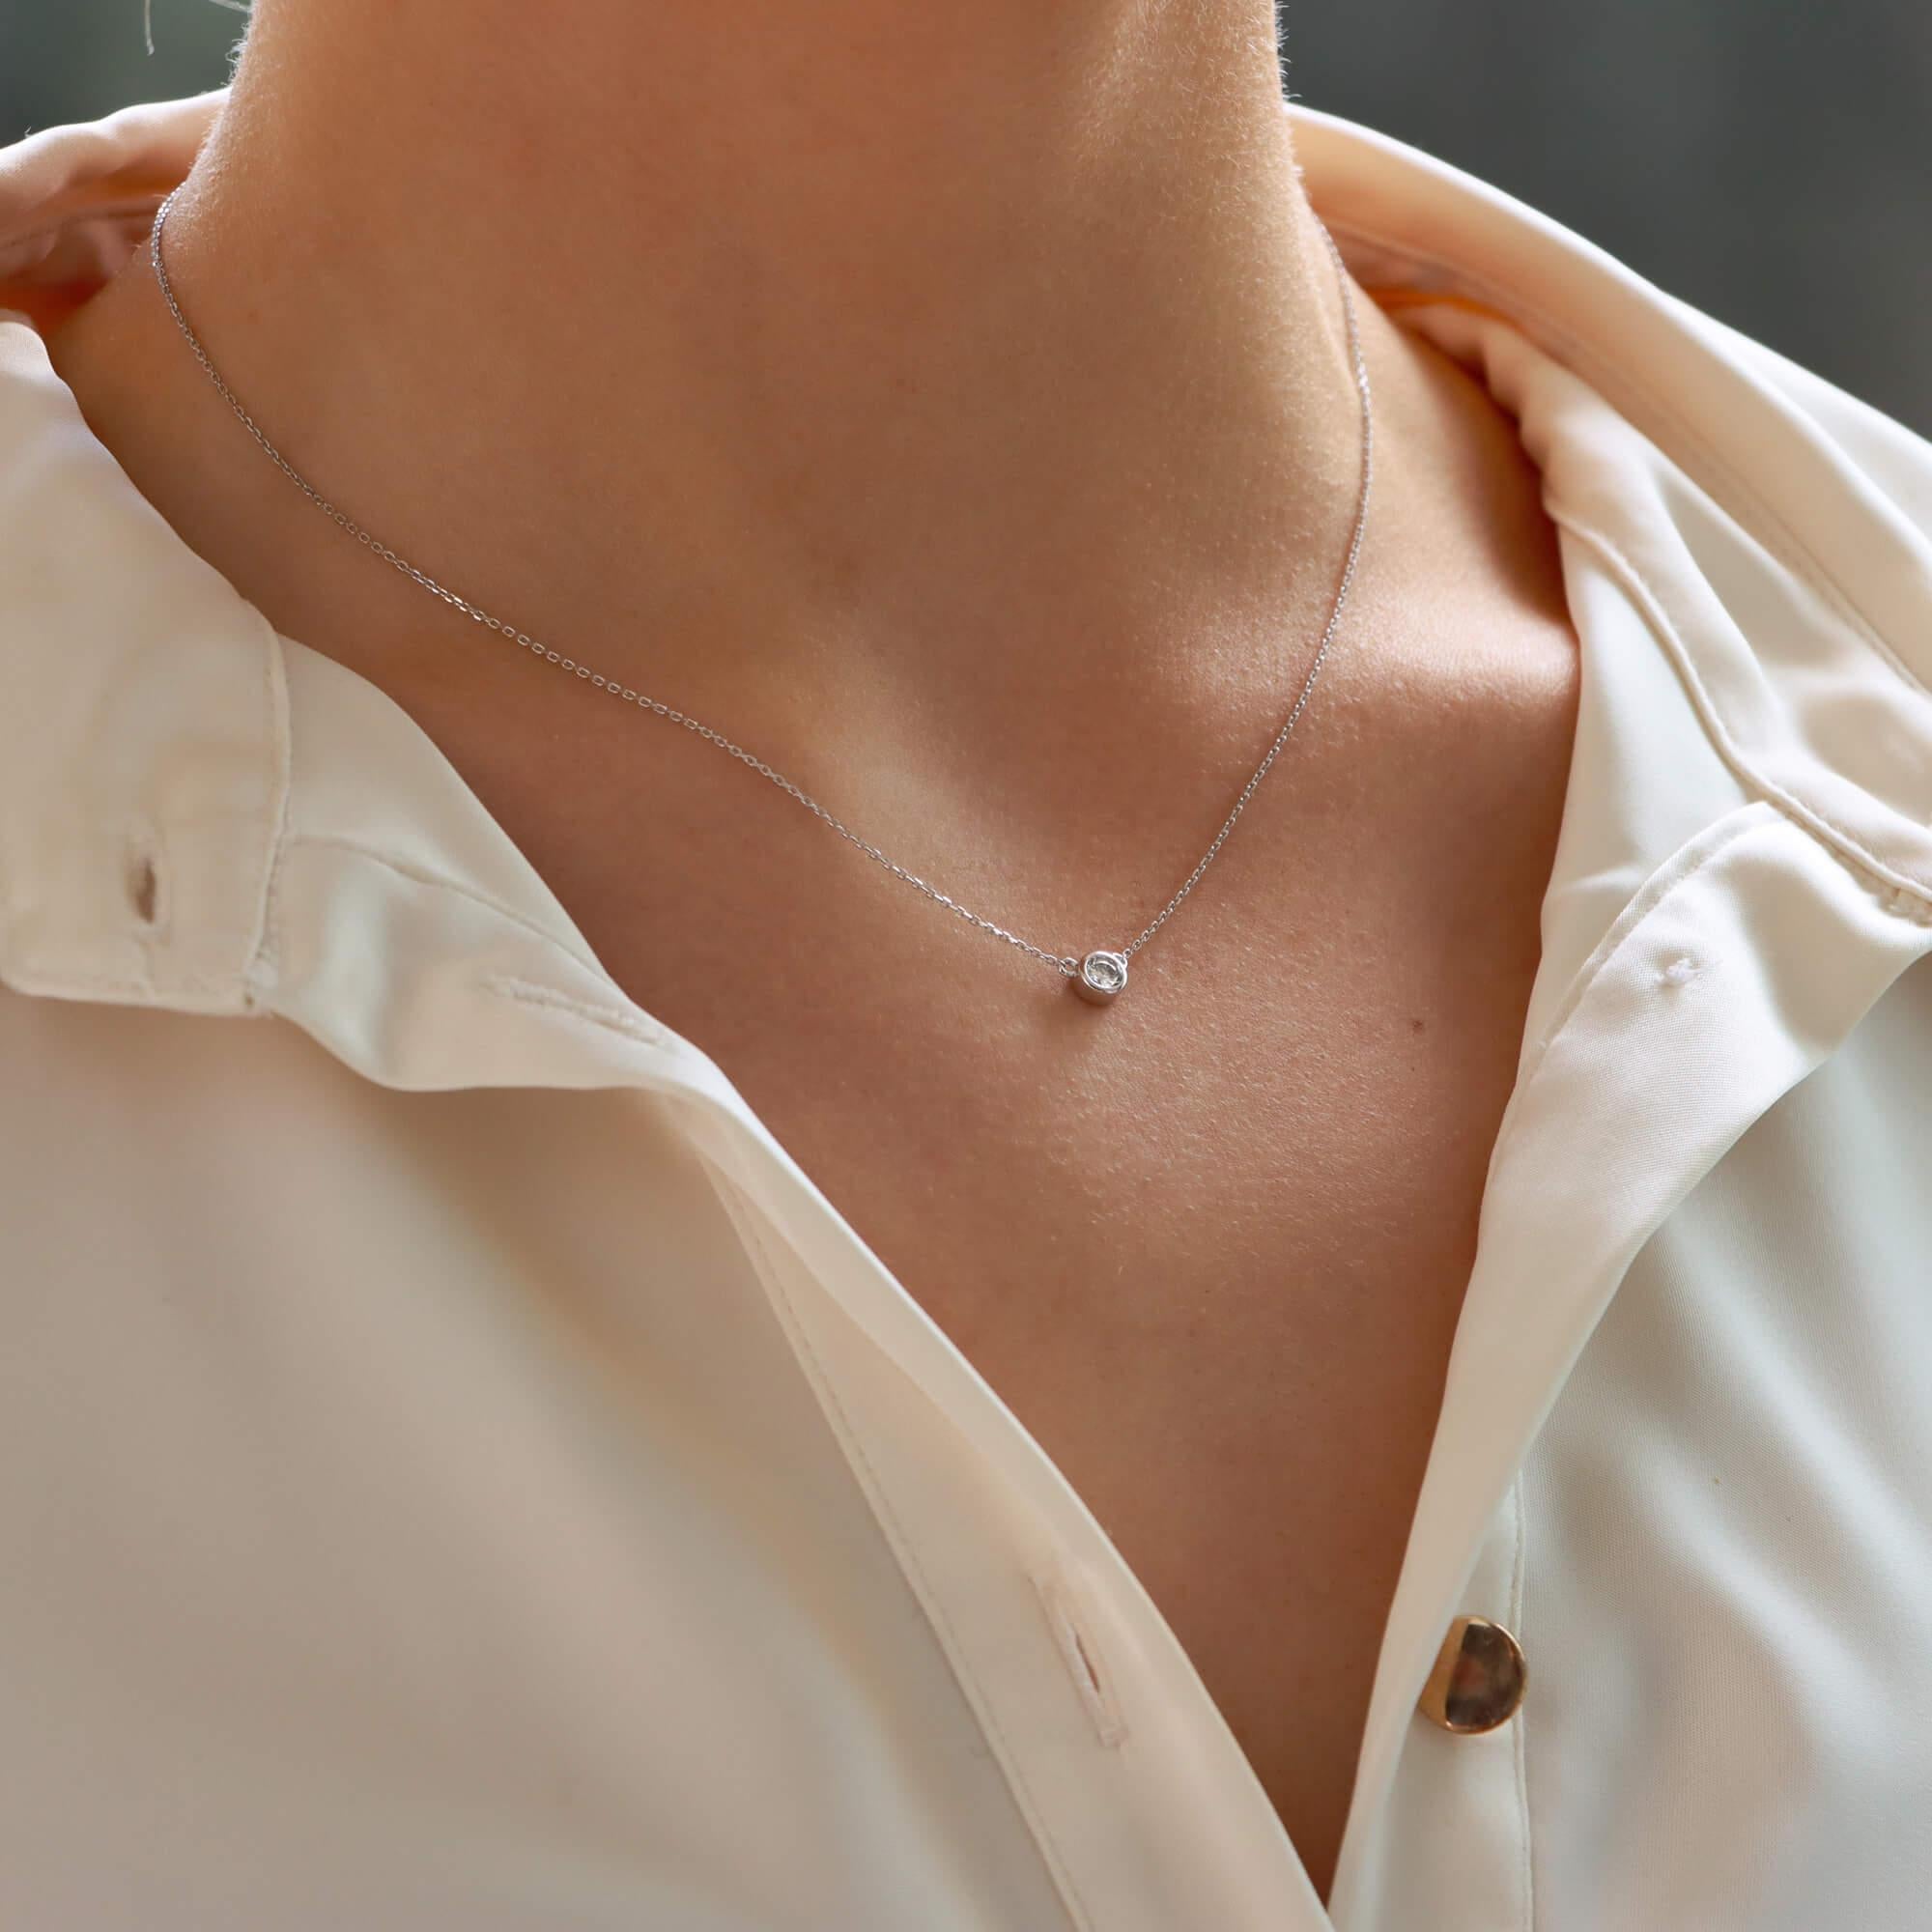 A beautiful contemporary single solitaire diamond pendant set in 14k white gold.

The pendant is solely set with a sparkly round brilliant cut diamond that is rub over set in a shiny white gold setting. The pendant hangs from a 16-inch fine white